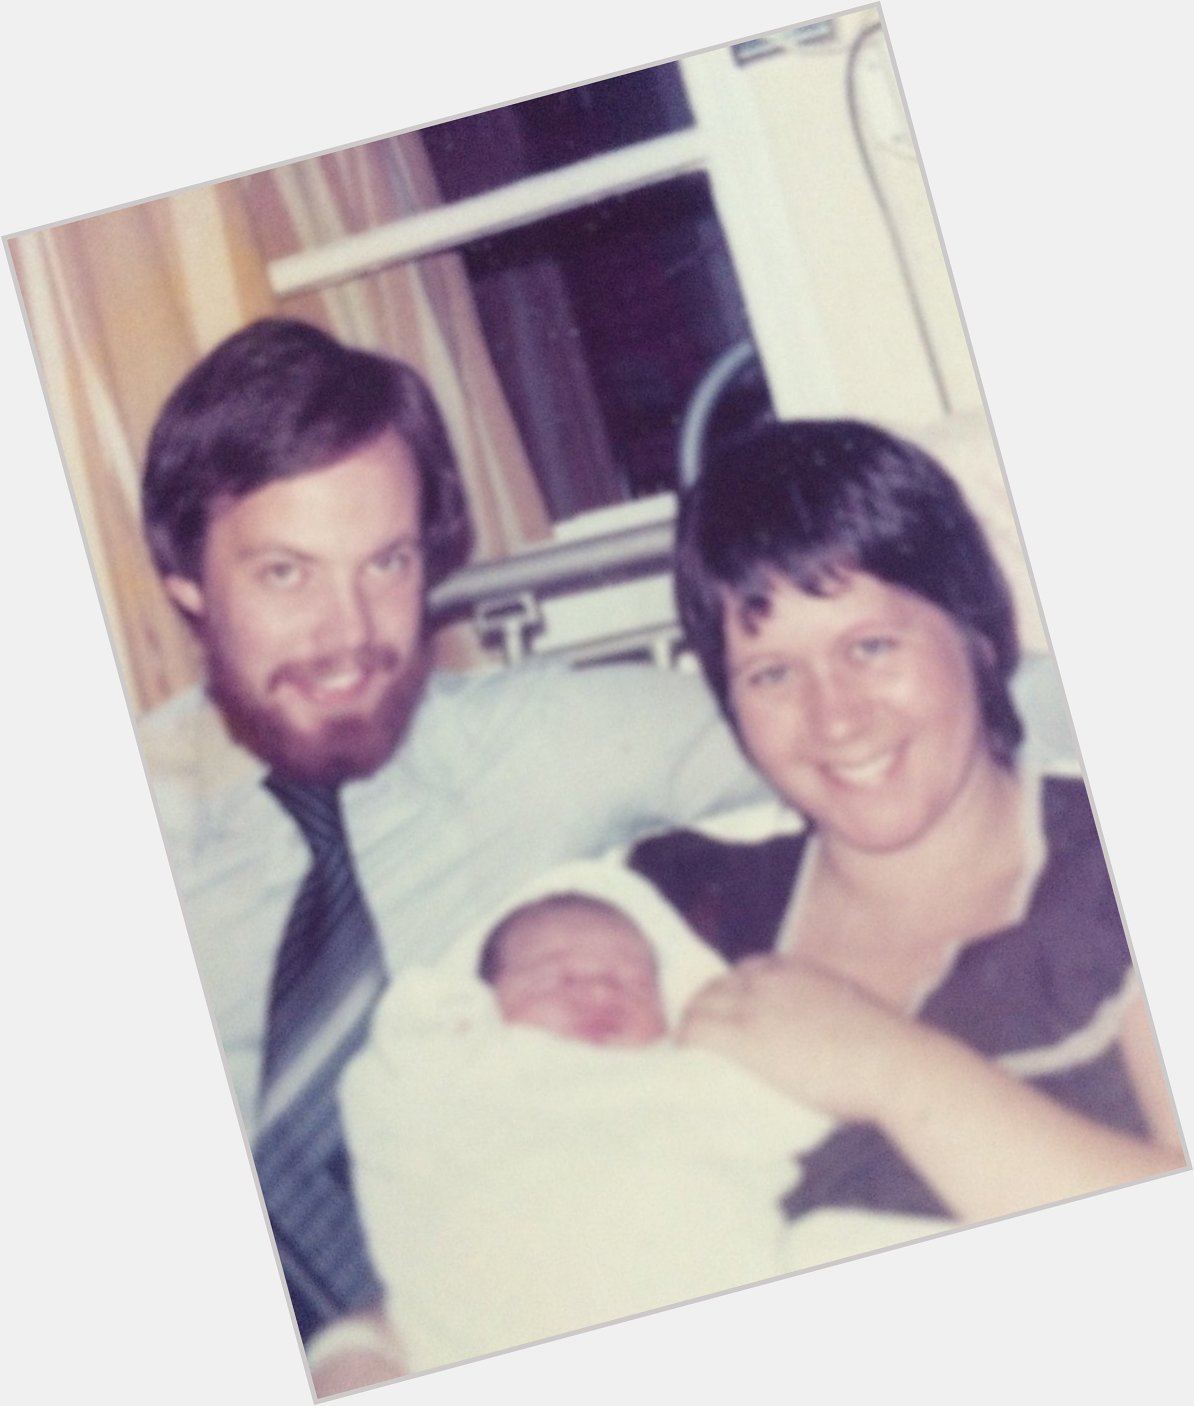 41years ago a small bundle of joy came into our lives! Look how he s grown! Happy Birthday (Dr) John Walter! 